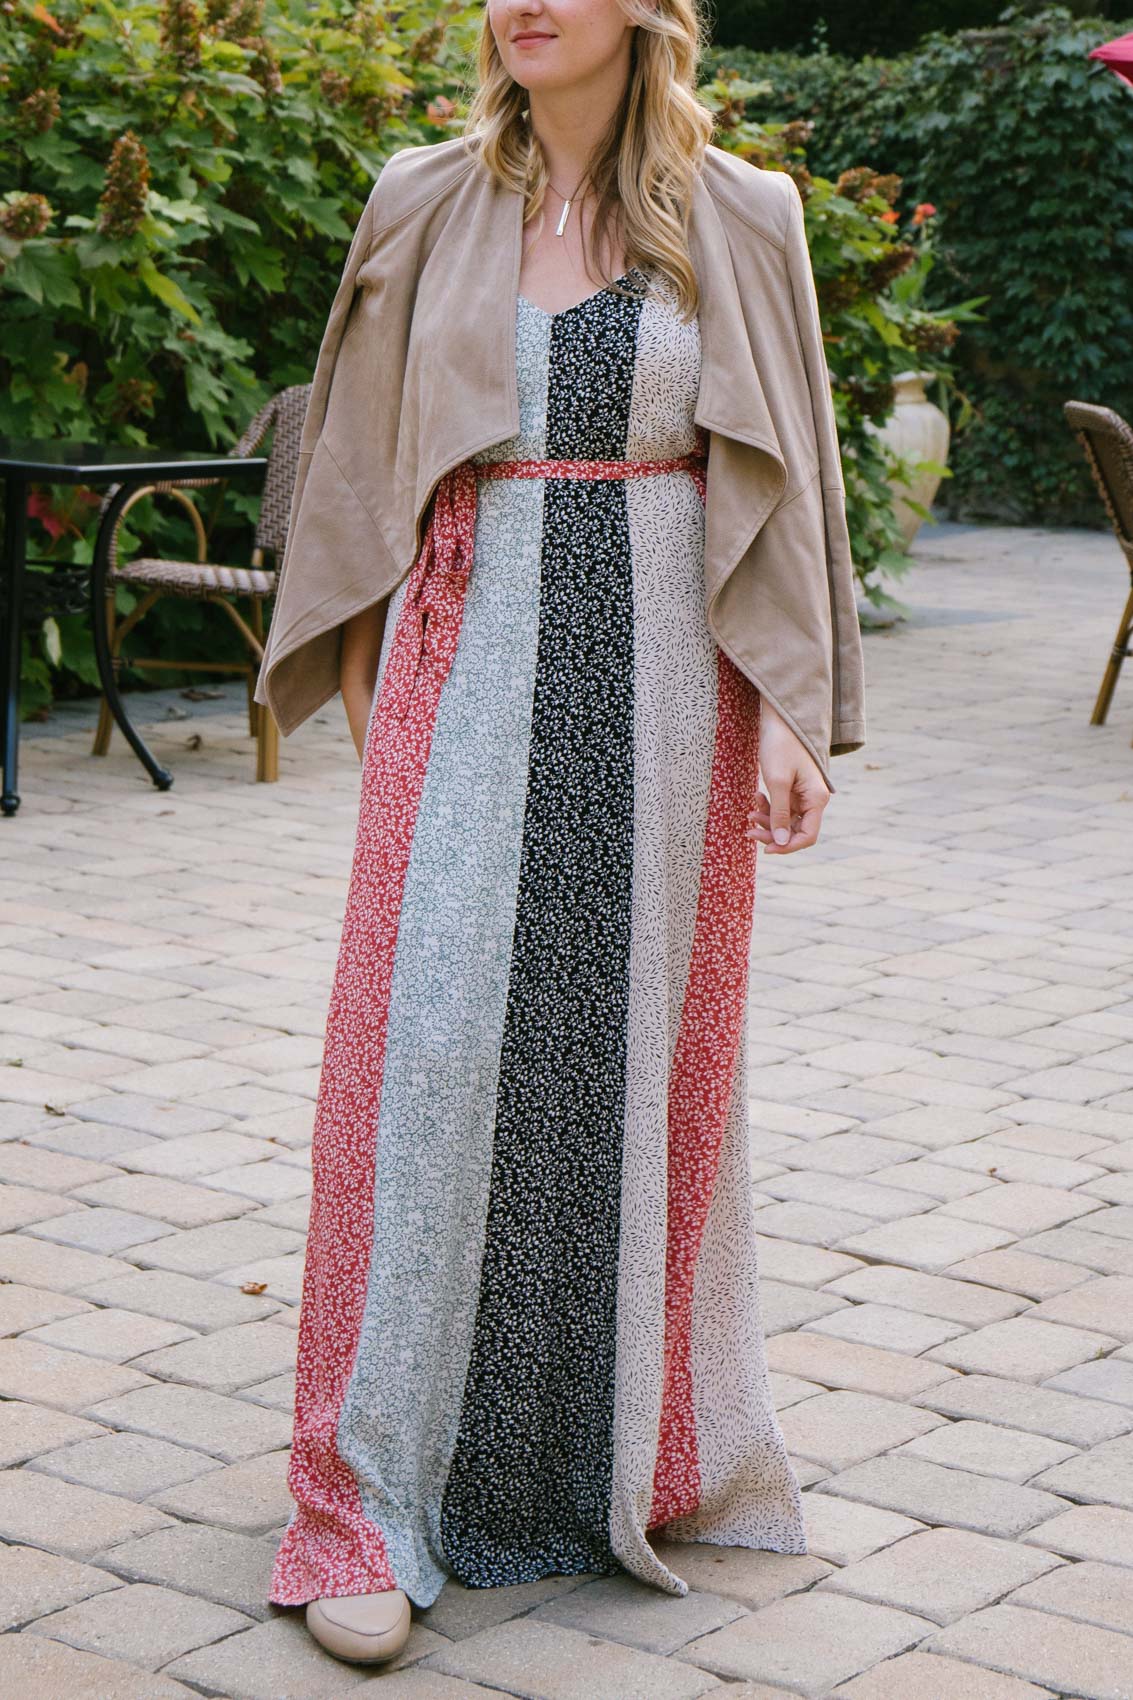 Allyn Lewis styles the BB Dakota Wade Faux Suede Jacket as a lightweight fall layer over a colorblock maxi dress. 